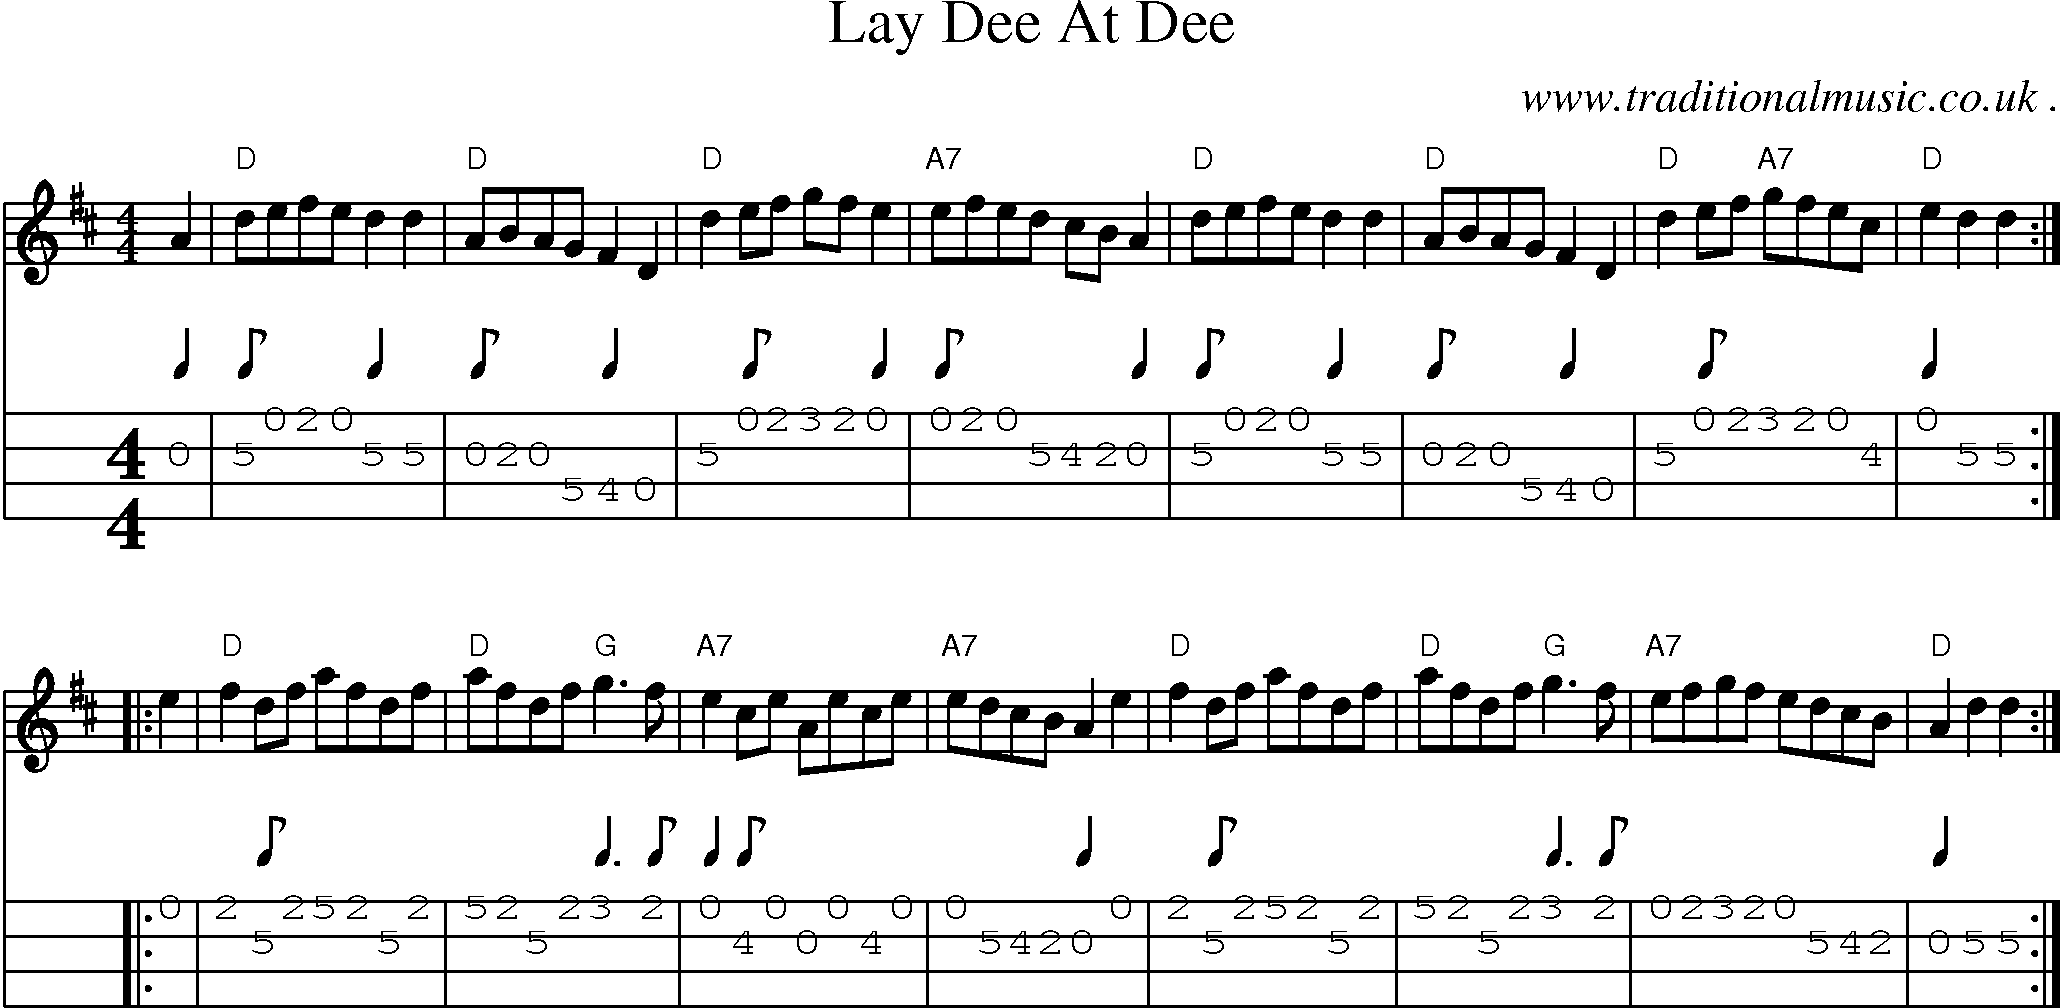 Sheet-music  score, Chords and Mandolin Tabs for Lay Dee At Dee